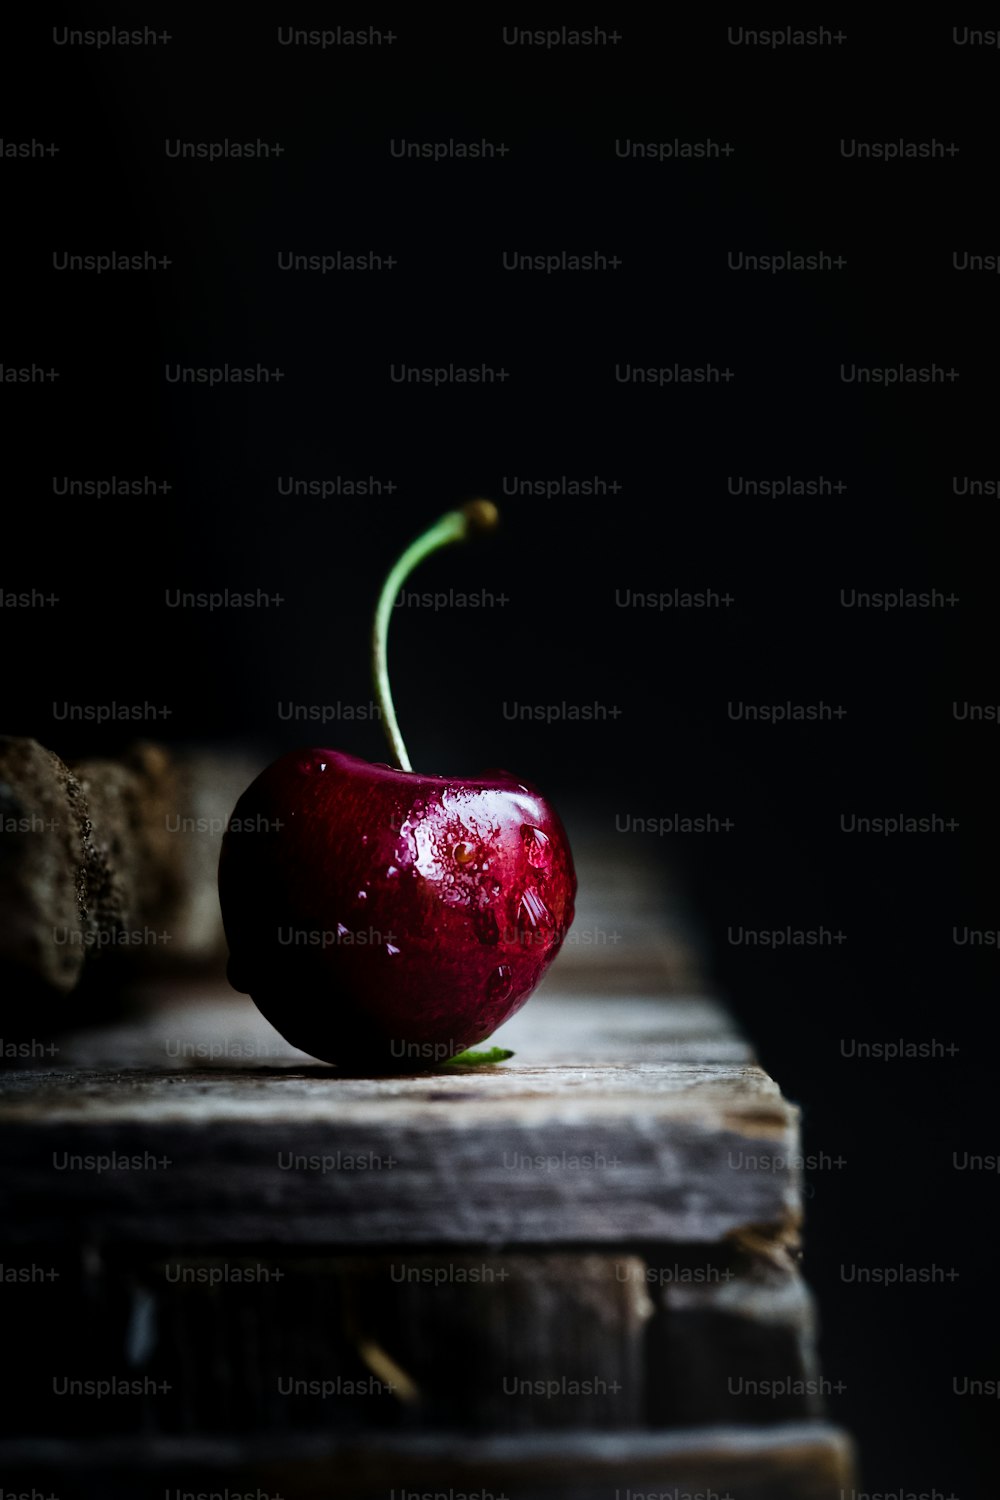 Yellow Apple Pictures  Download Free Images on Unsplash